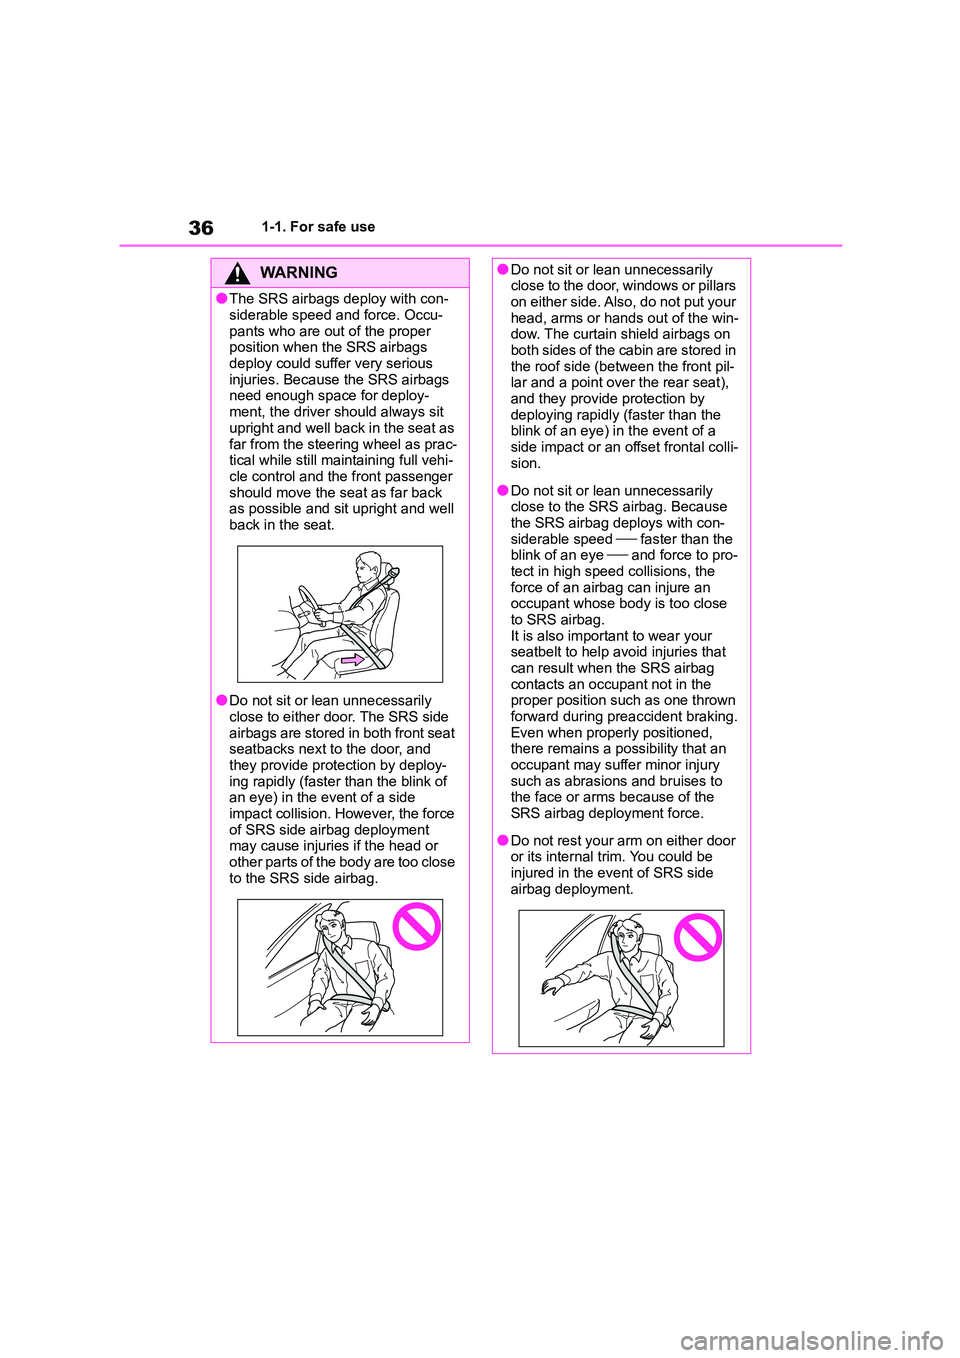 TOYOTA GR86 2022  Owners Manual (in English) 361-1. For safe use
WA R N I N G
●The SRS airbags deploy with con- 
siderable speed and force. Occu-
pants who are out of the proper  position when the SRS airbags  
deploy could suffer very serious